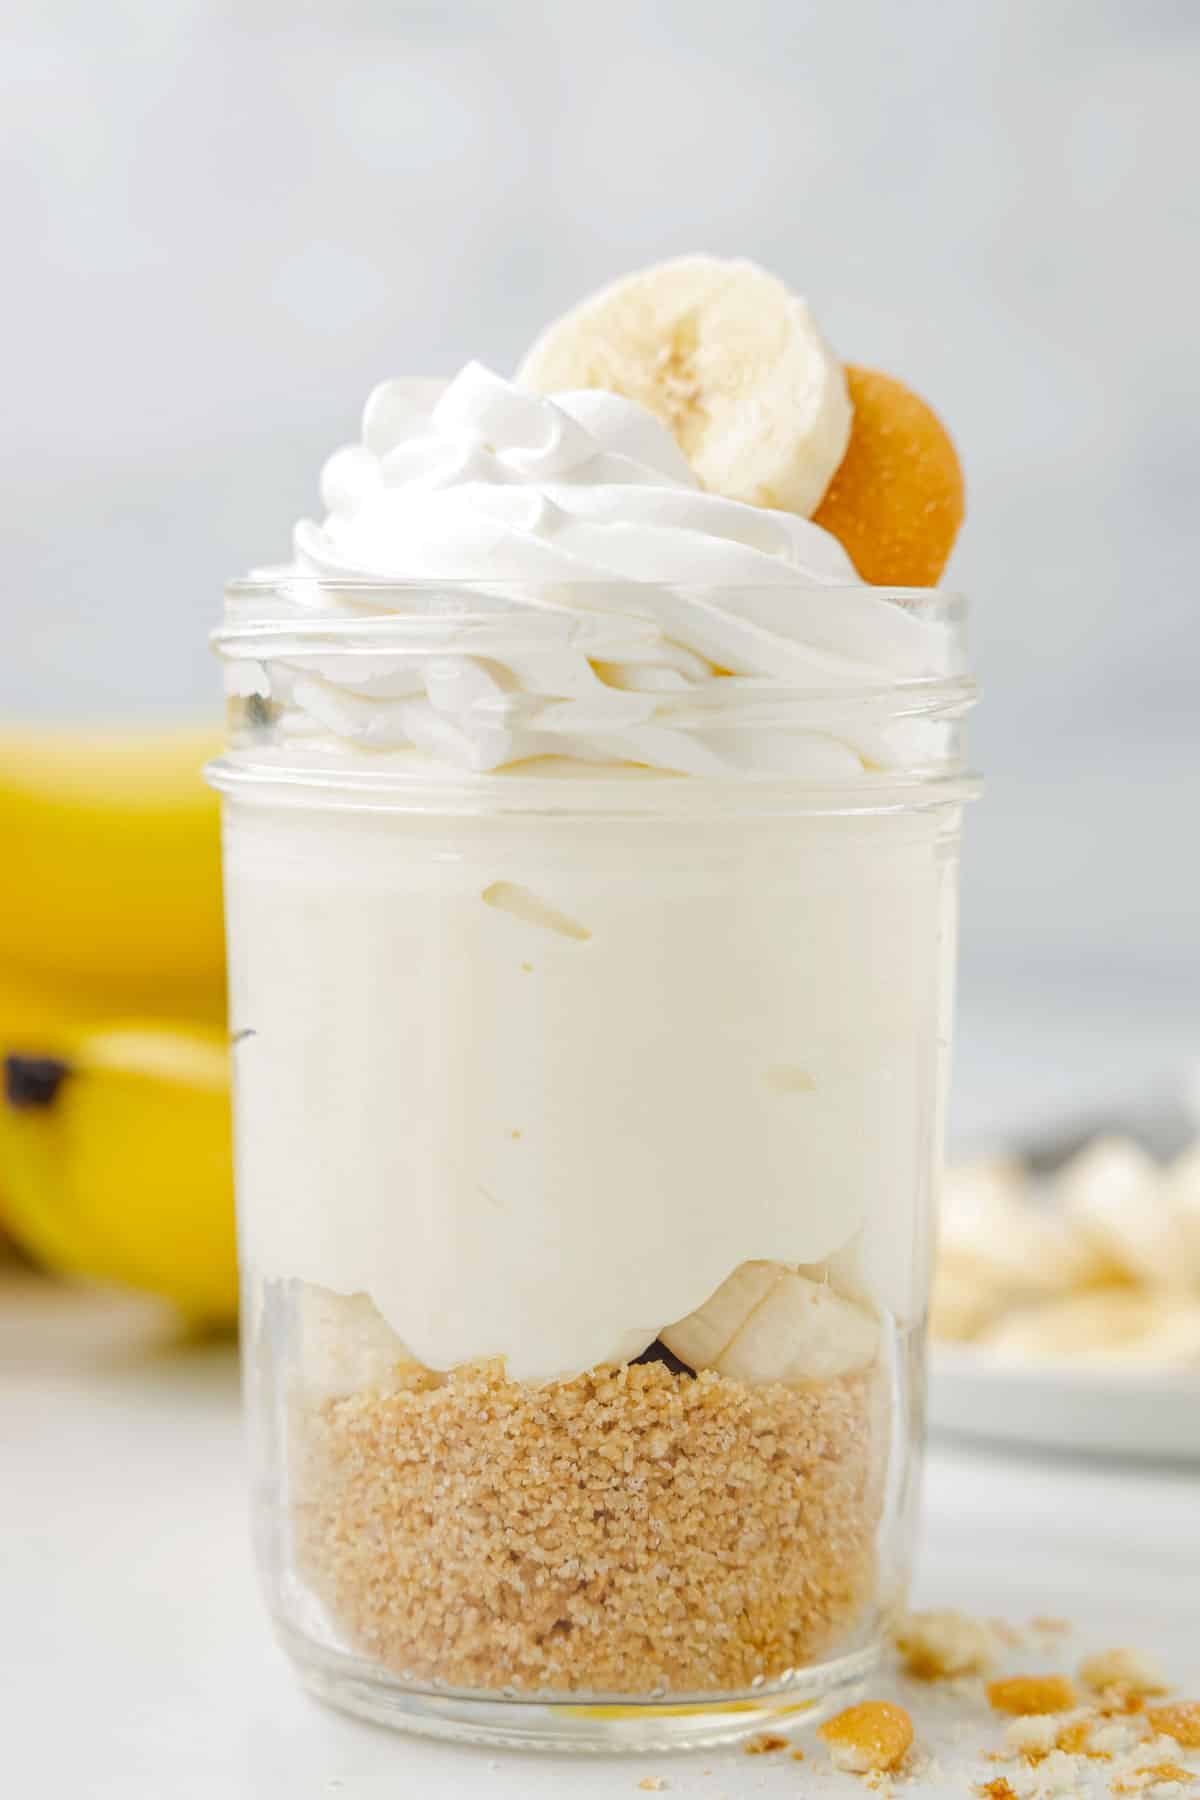 Single jar of no bake cheesecake, showing off the layers, with crumbs in front of the jar and bananas in background.